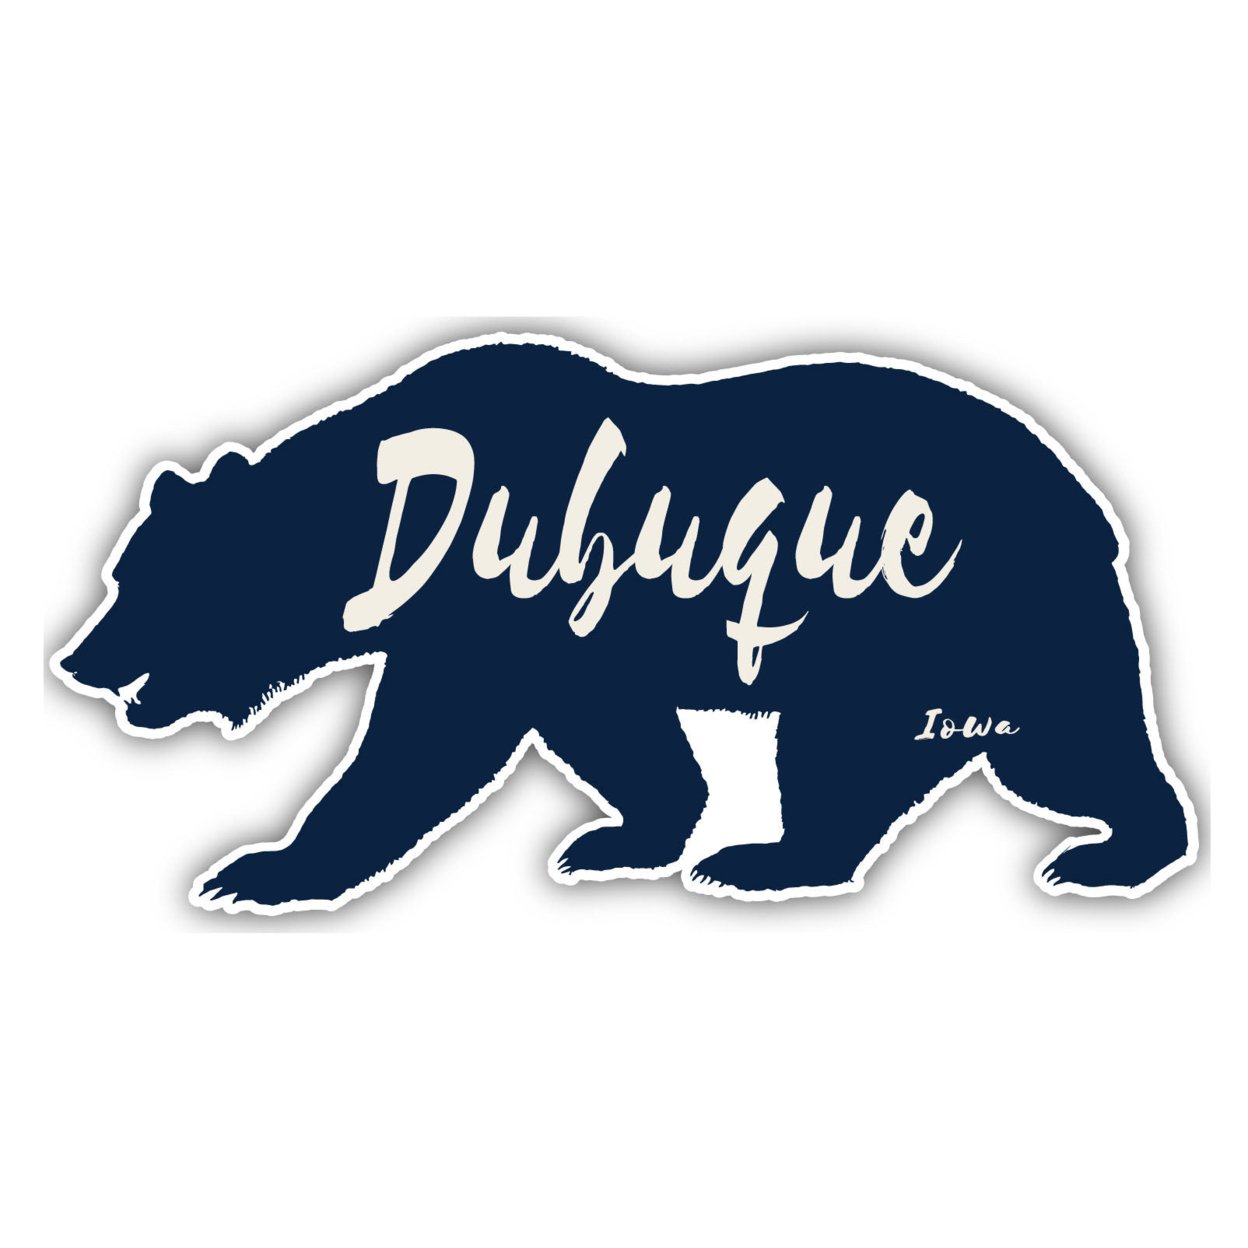 Dubuque Iowa Souvenir Decorative Stickers (Choose Theme And Size) - 4-Pack, 10-Inch, Great Outdoors